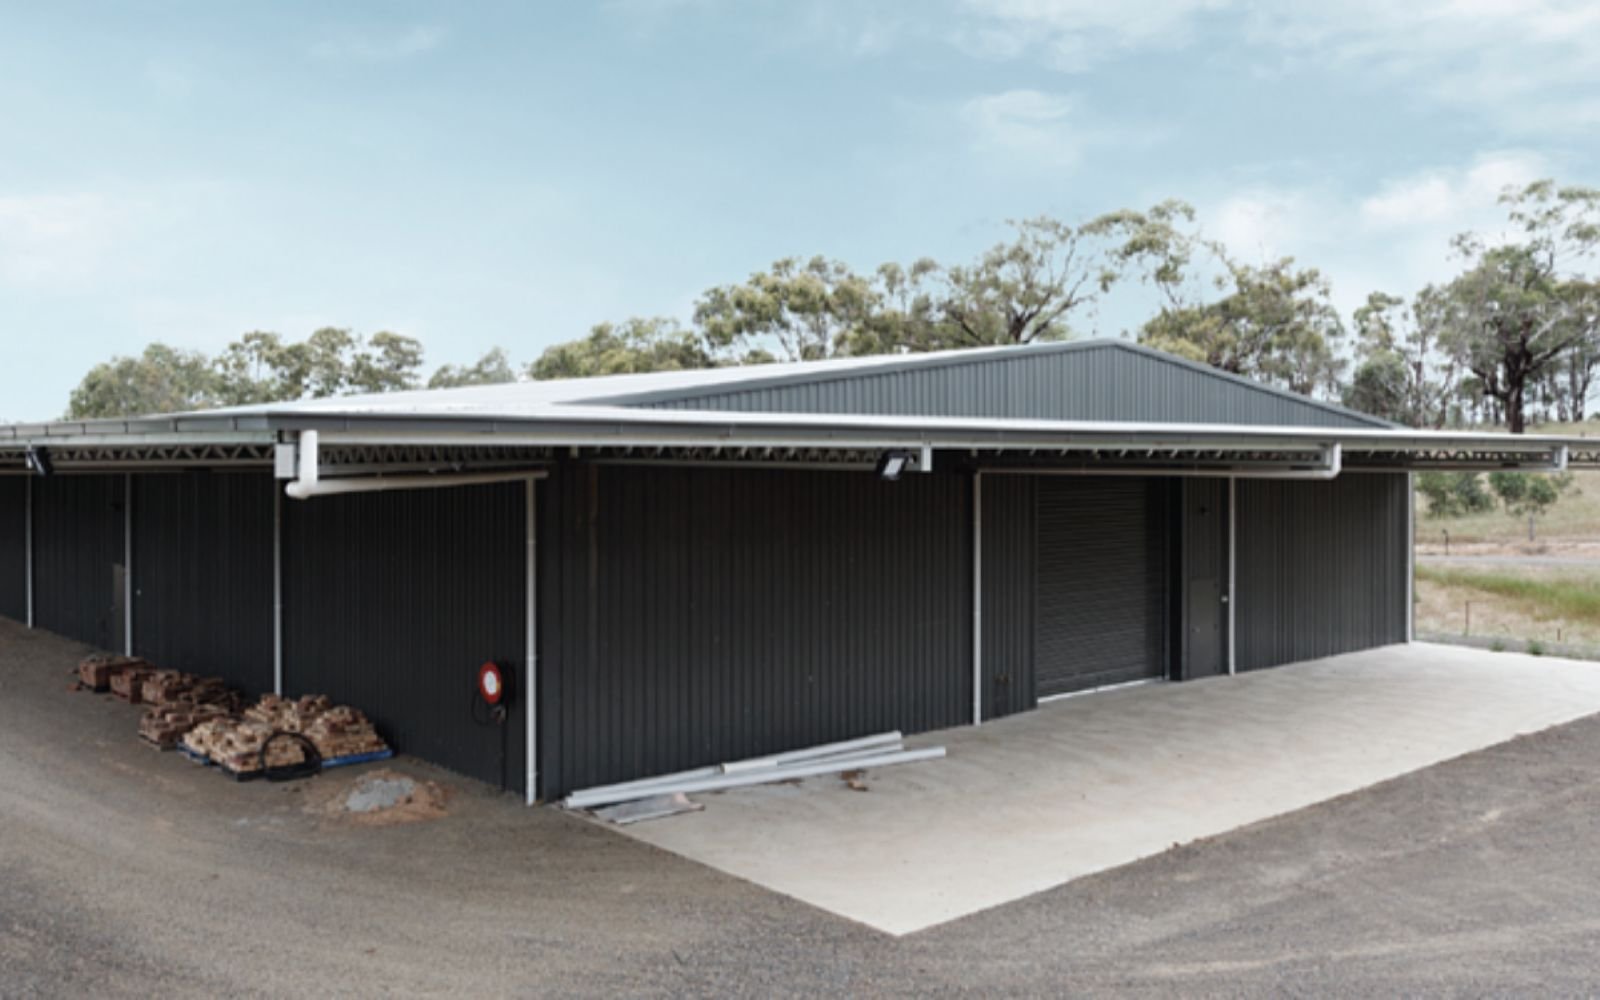 Knowsley winery shed 